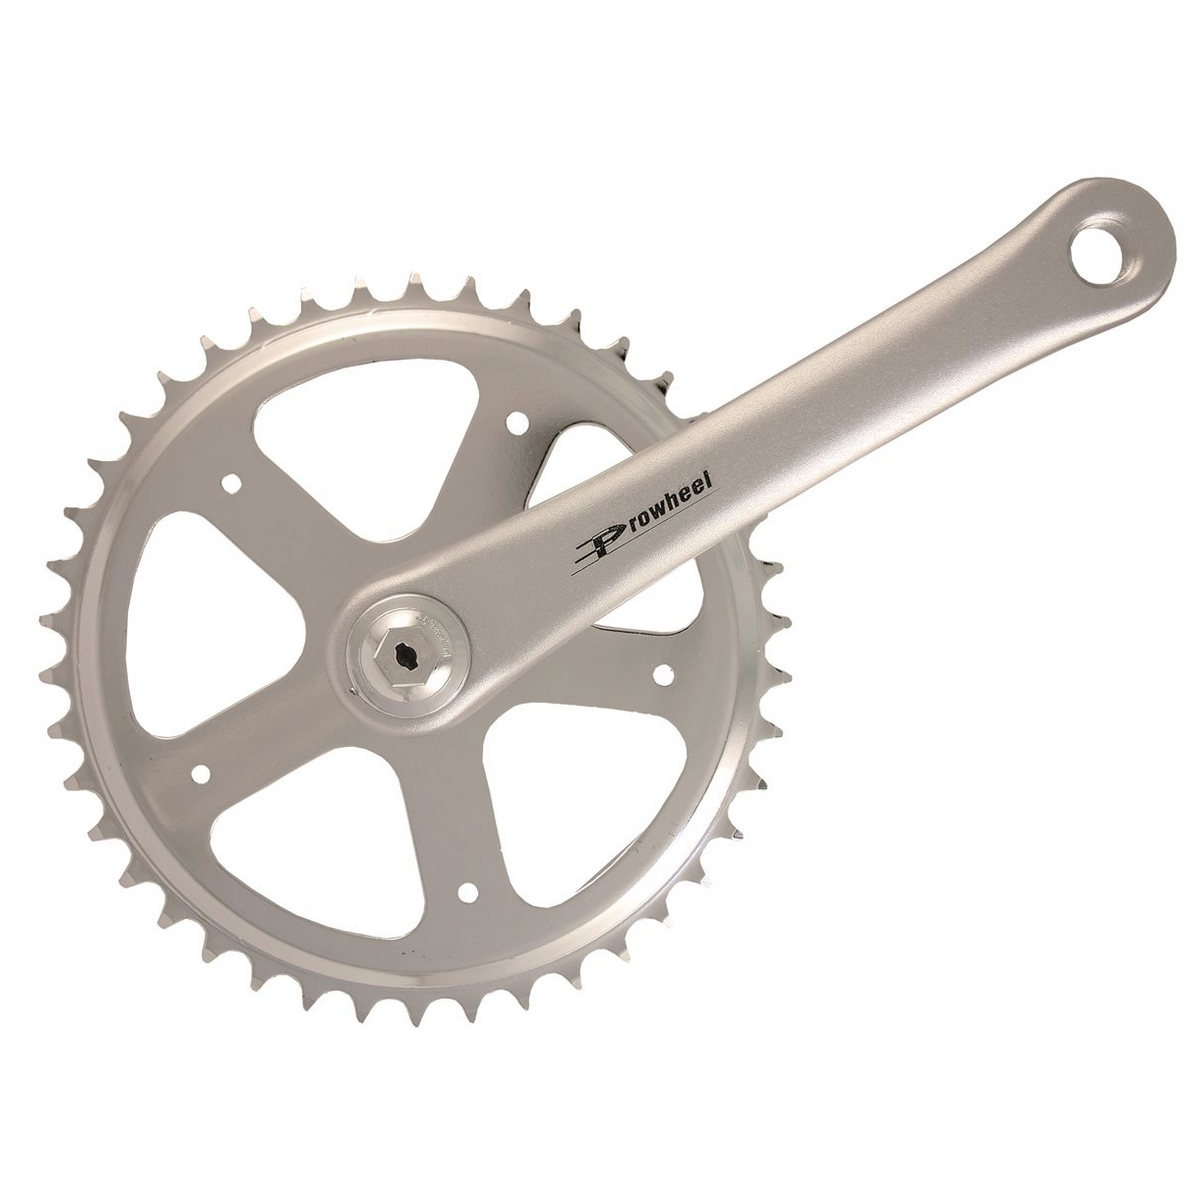 Crankset 42T x 170mm alloy arms chainring 3/32'' steel